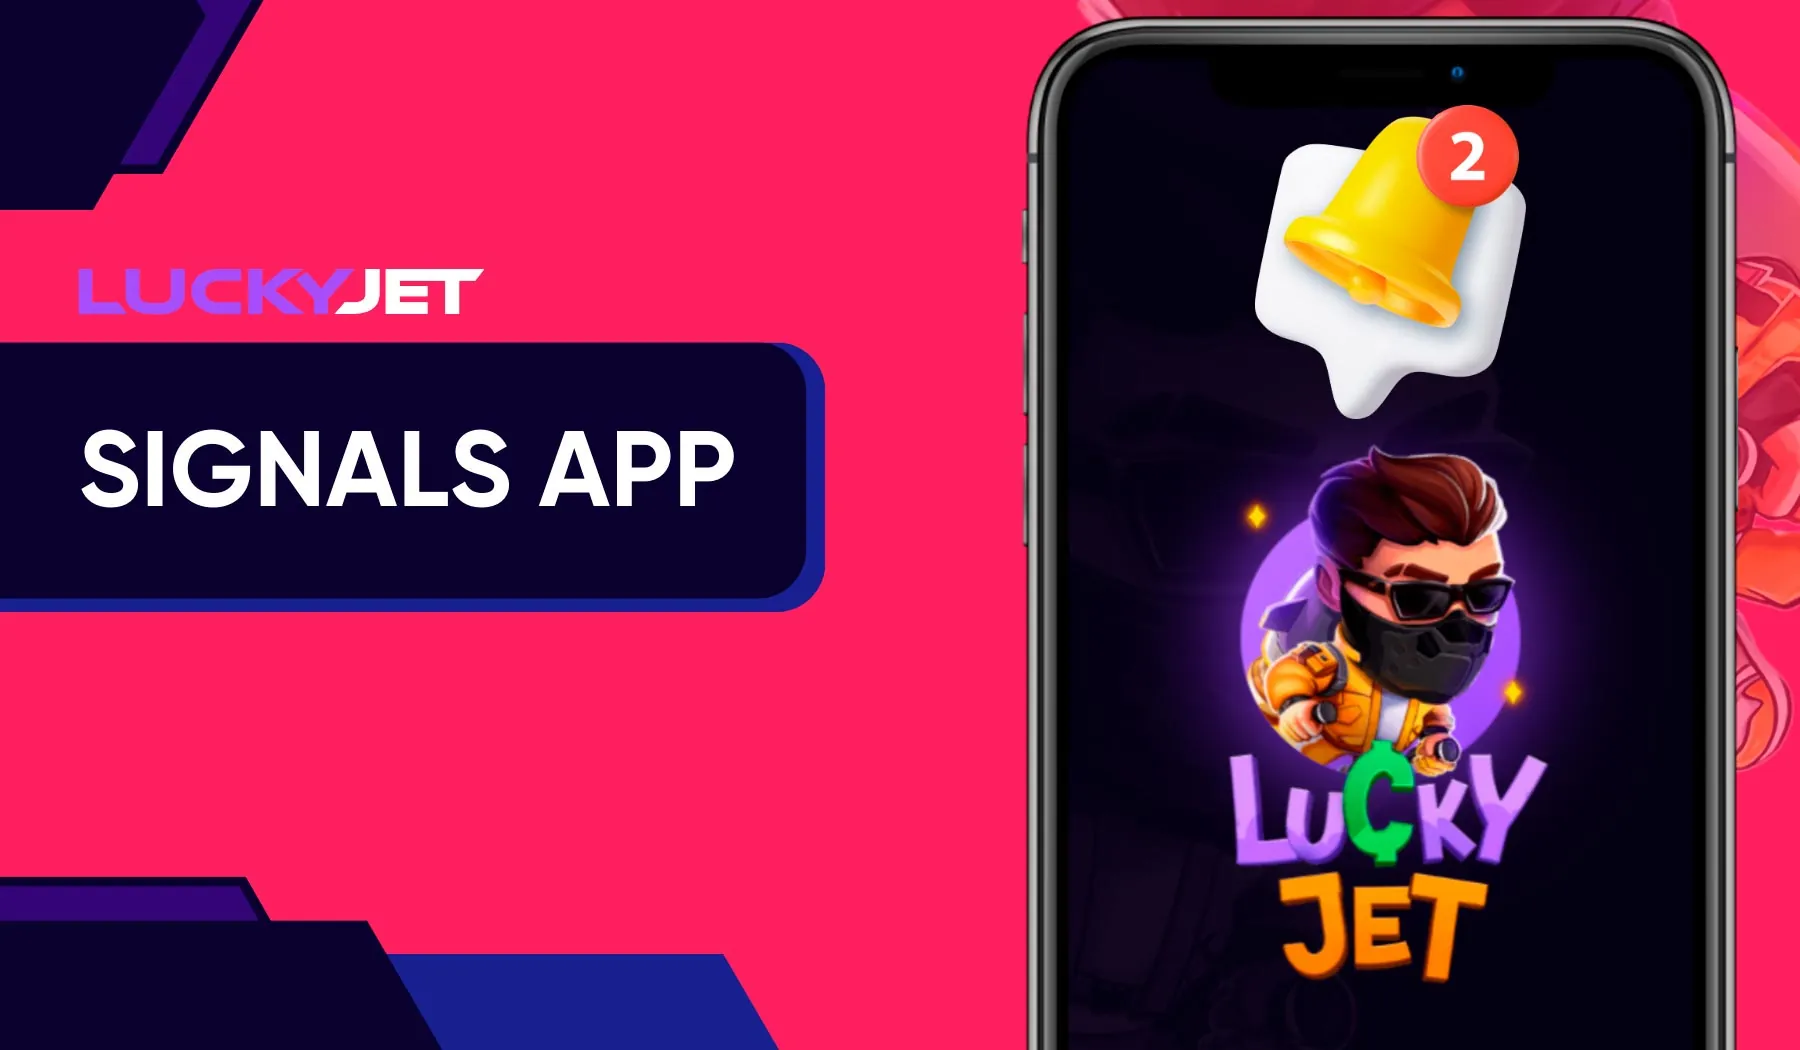 Enhance Your Gambling Experience with the Lucky Jet Signals App